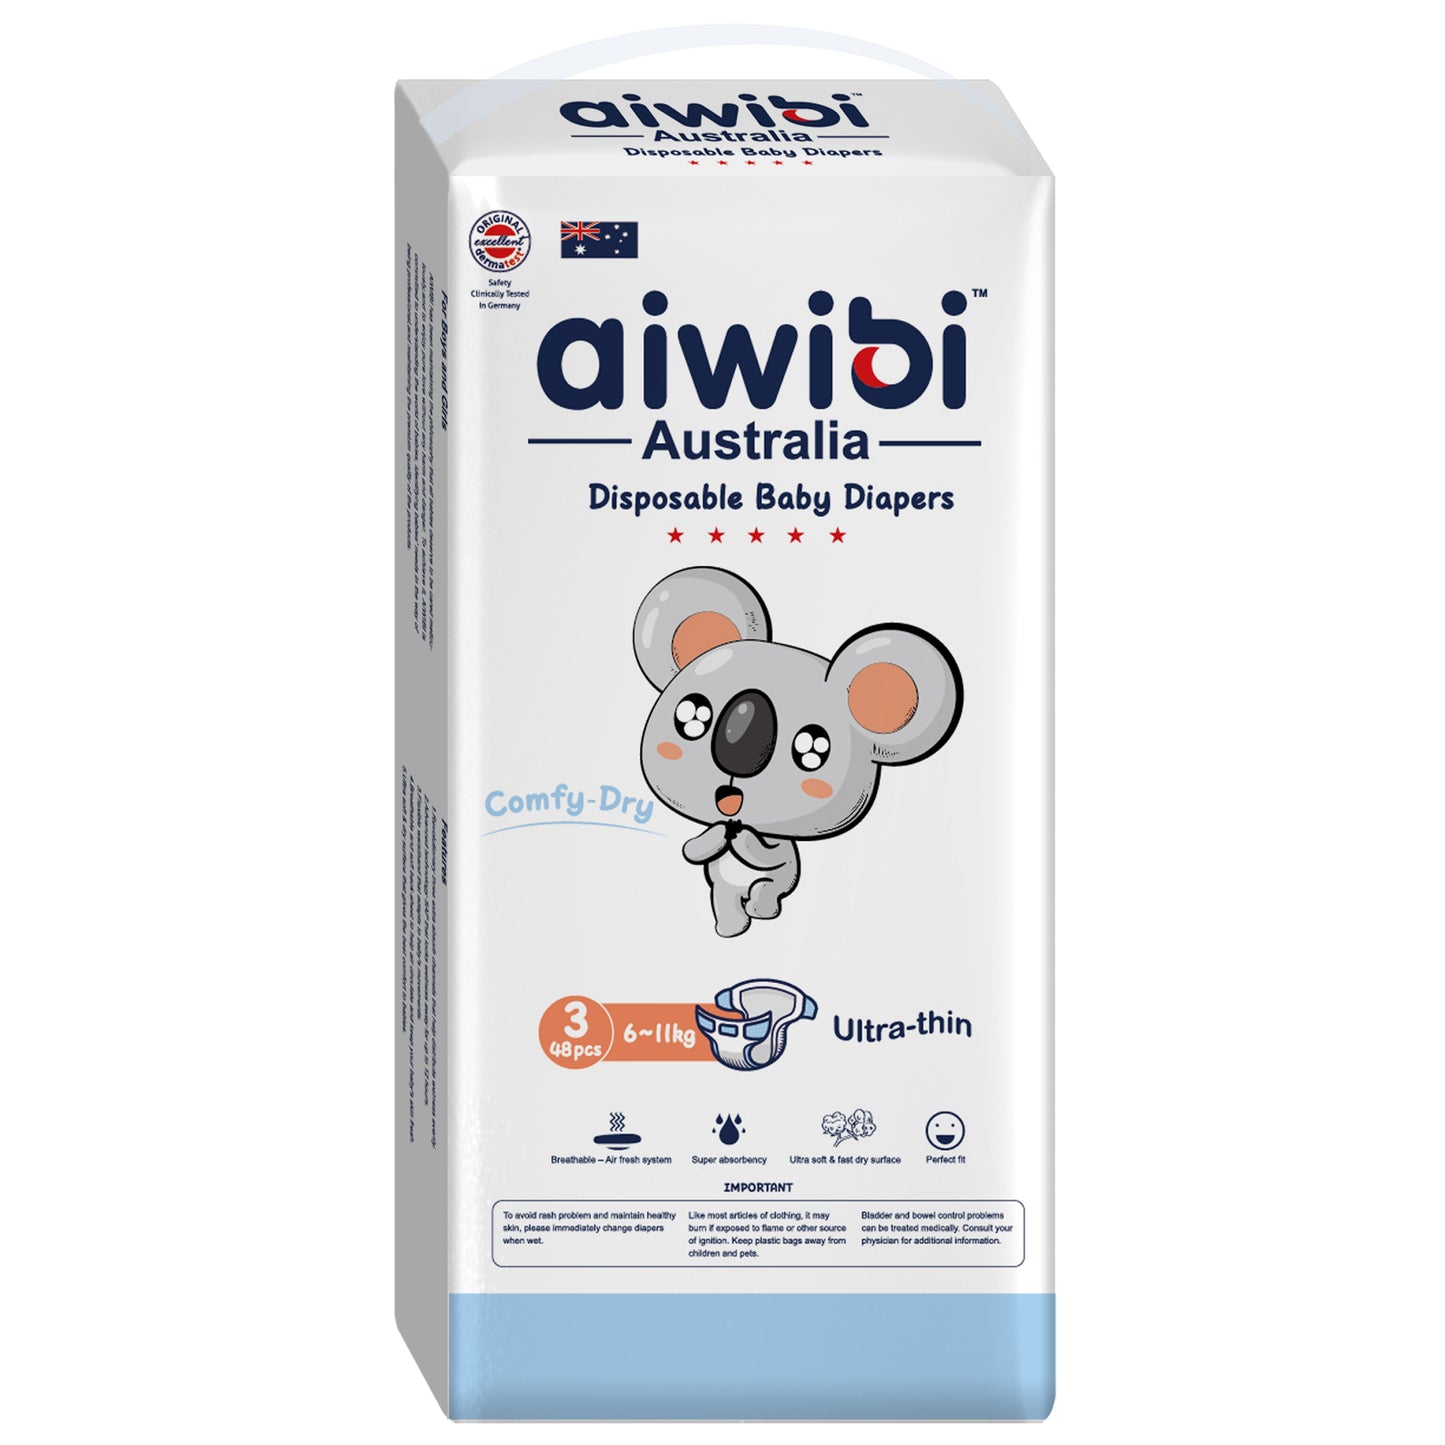 Aiwibi Diapers Size 3 | M (6-11 kg) | 48 Count